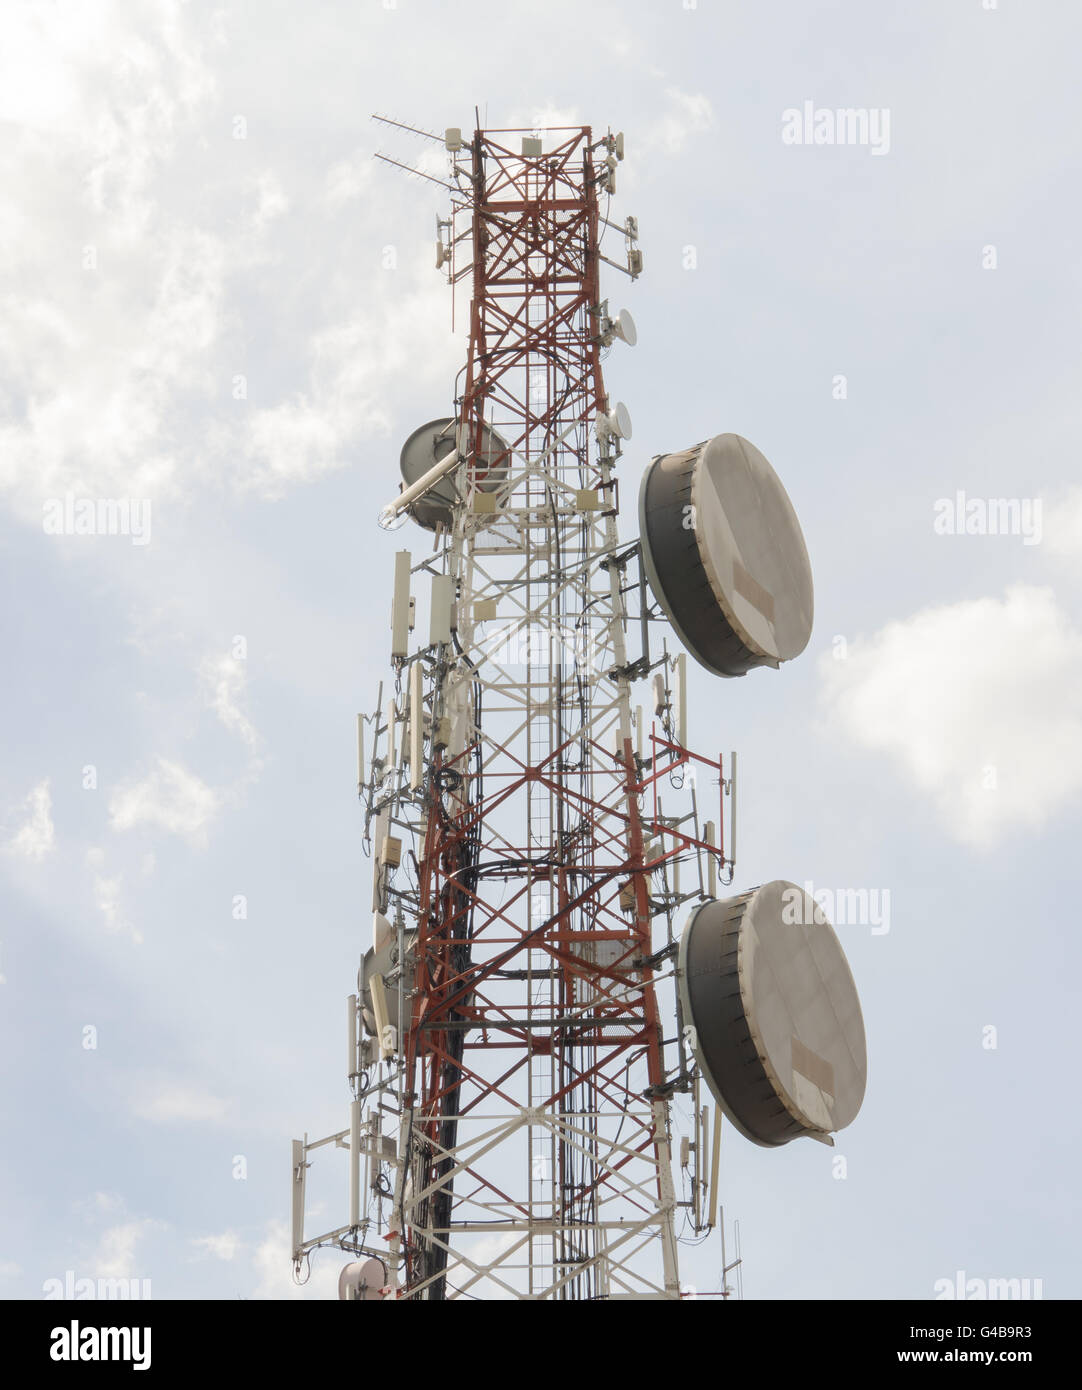 High-Tech Sophisticated Electronic Communications Tower Stock Photo